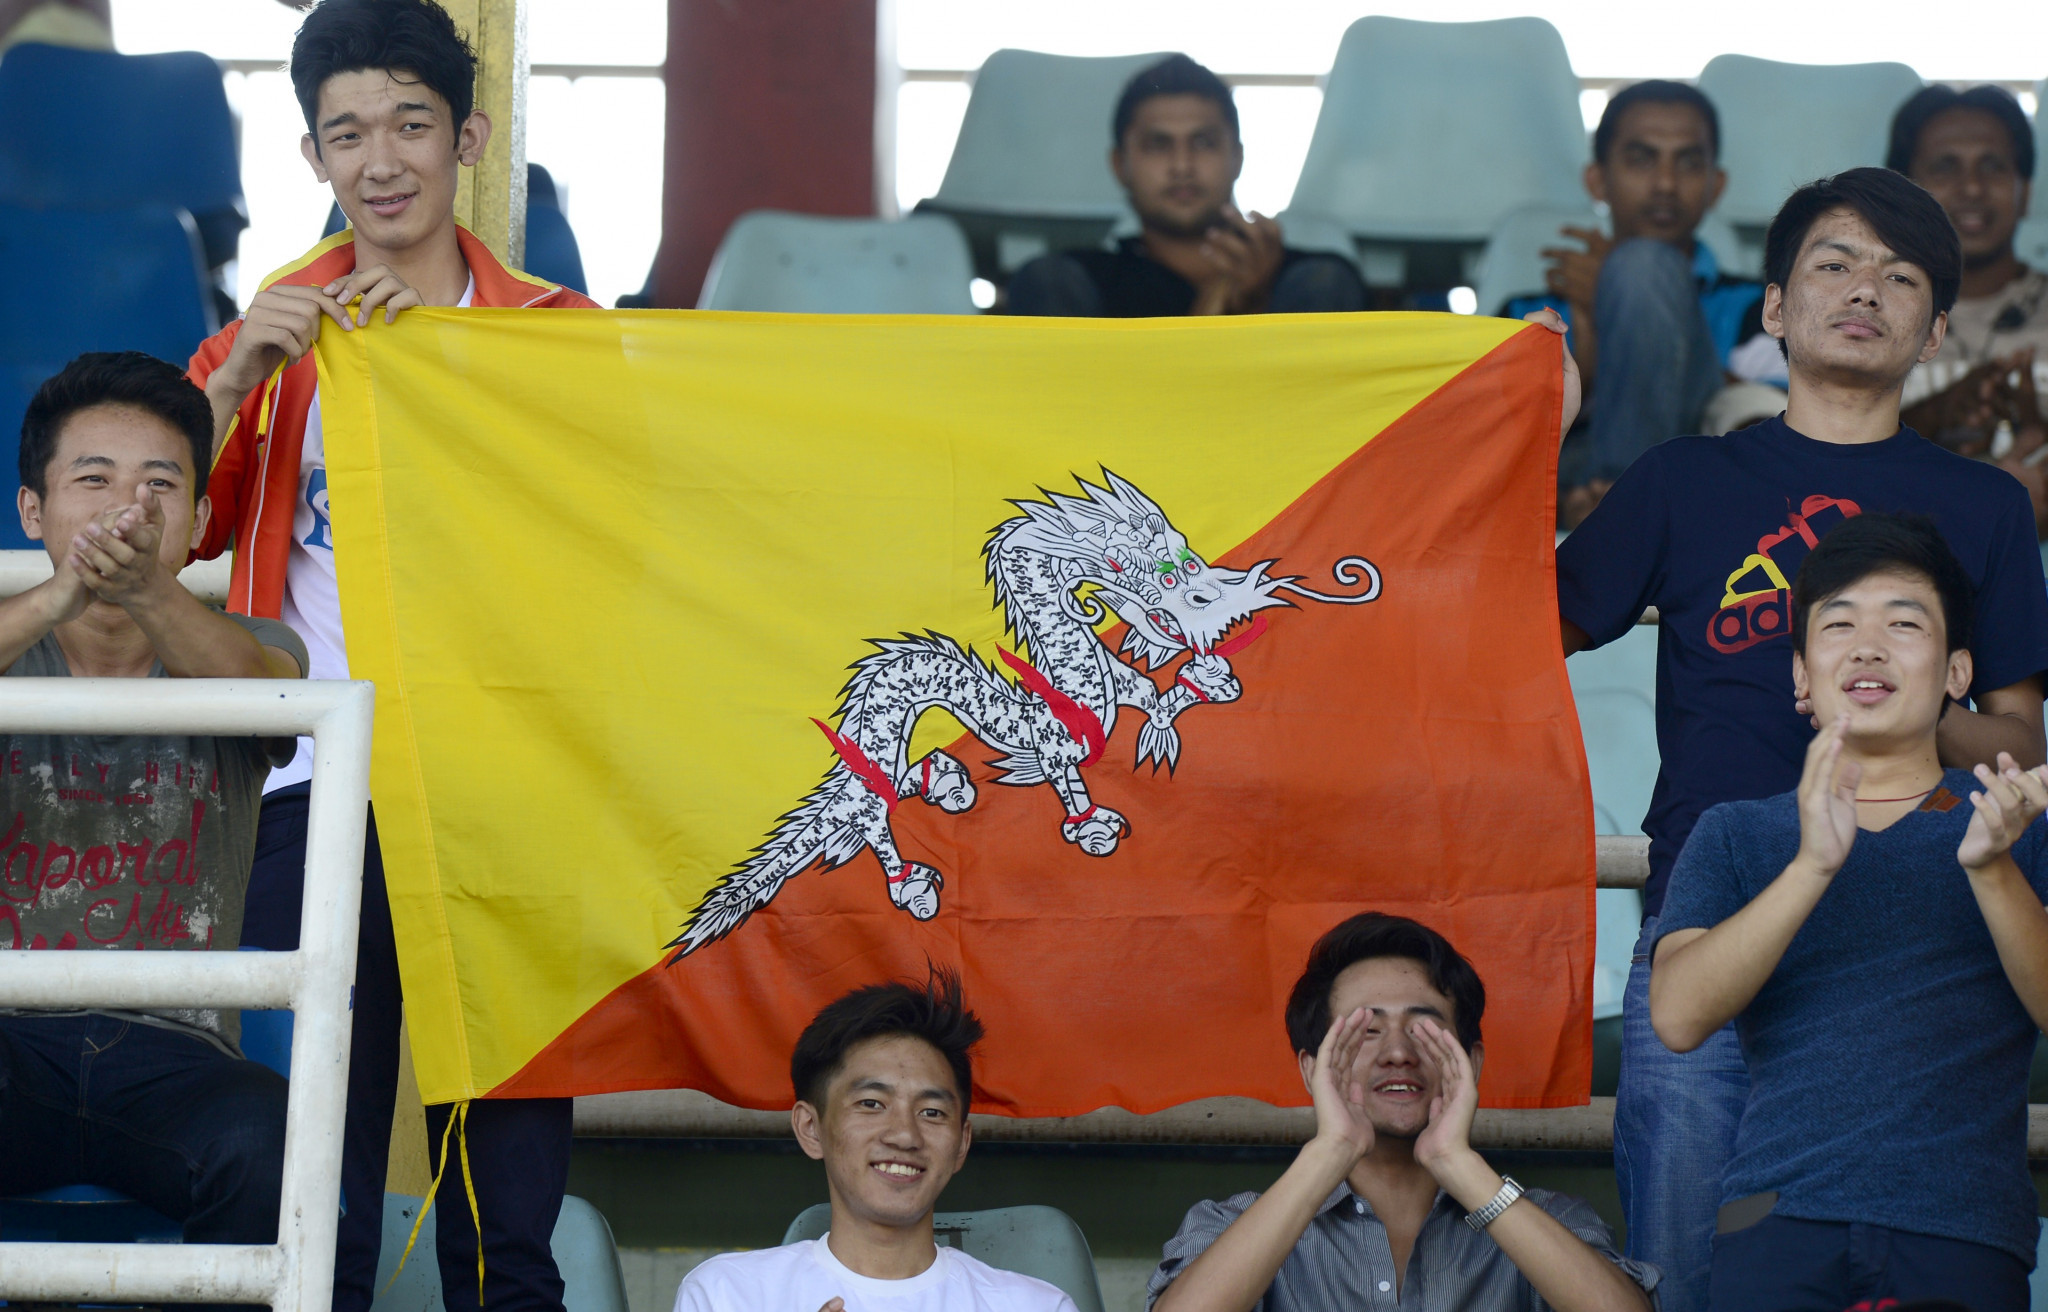 Sporting events will resume in Bhutan today with strict COVID-19 protocols in place ©Getty Images